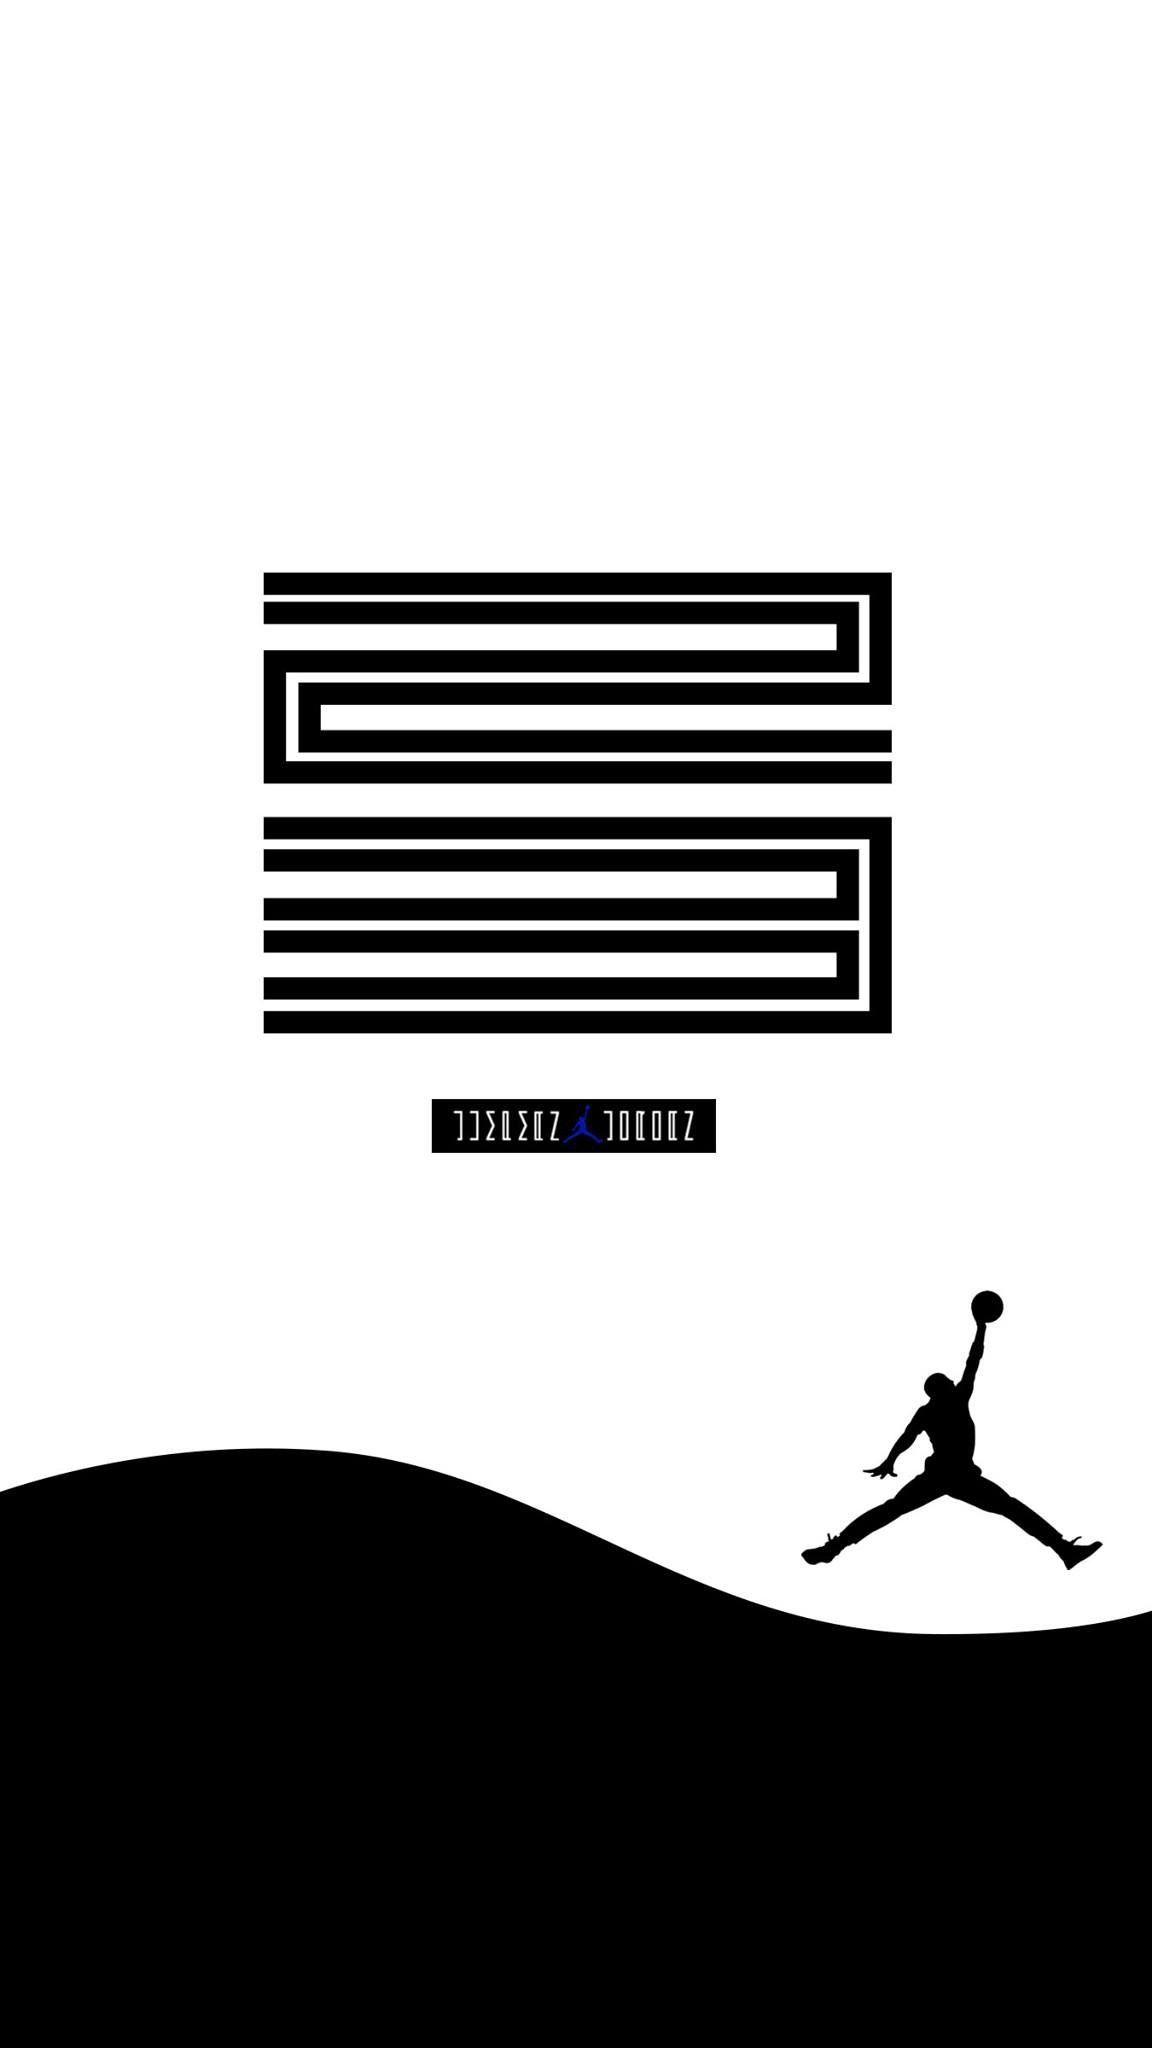 Jordan 11 concords mobile wallpaper. Projects to Try in 2019